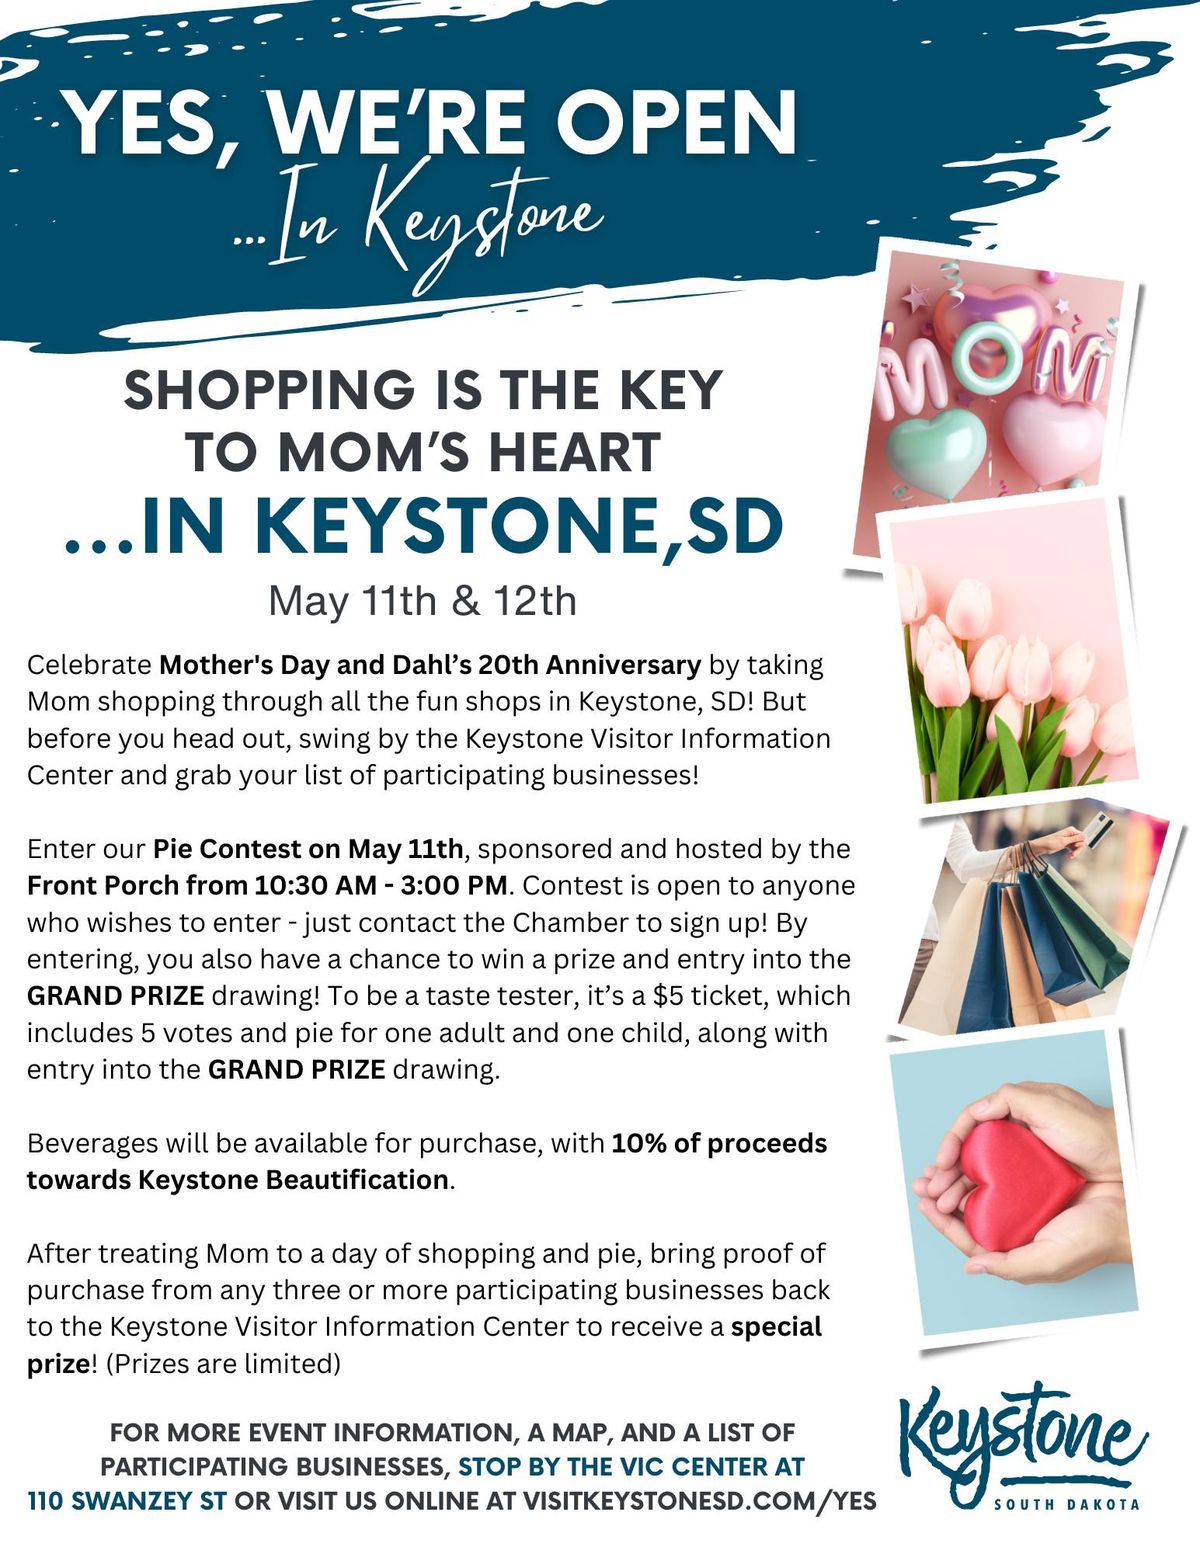 Yes, We're Open...Shopping is the Key To mom's Heart...In Keystone, SD